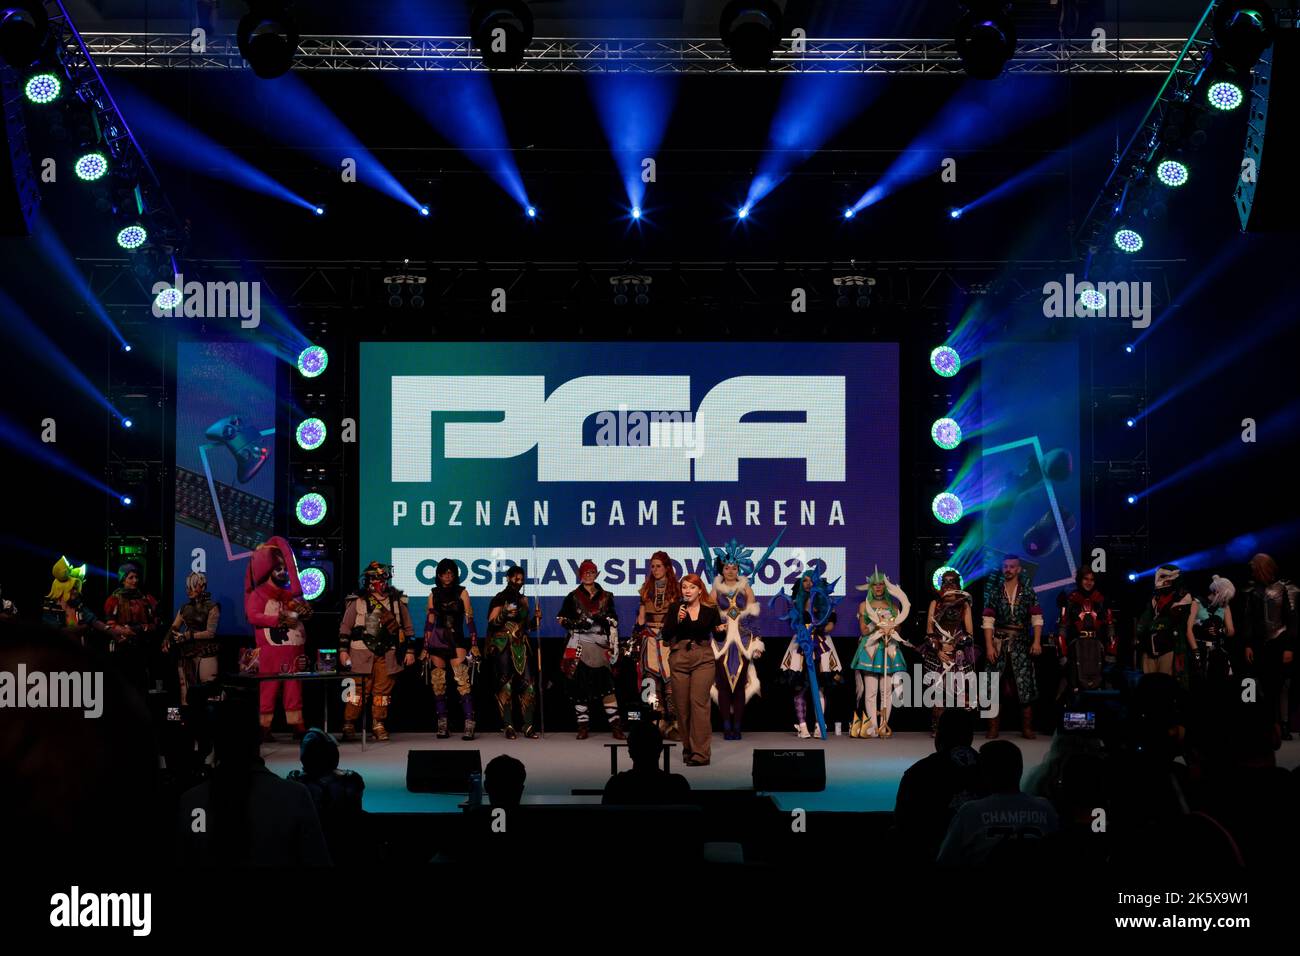 Poland, Poznan - October 09, 2022: Poznan Game Arena. Cosplay contest, during an event related to video games. Stock Photo